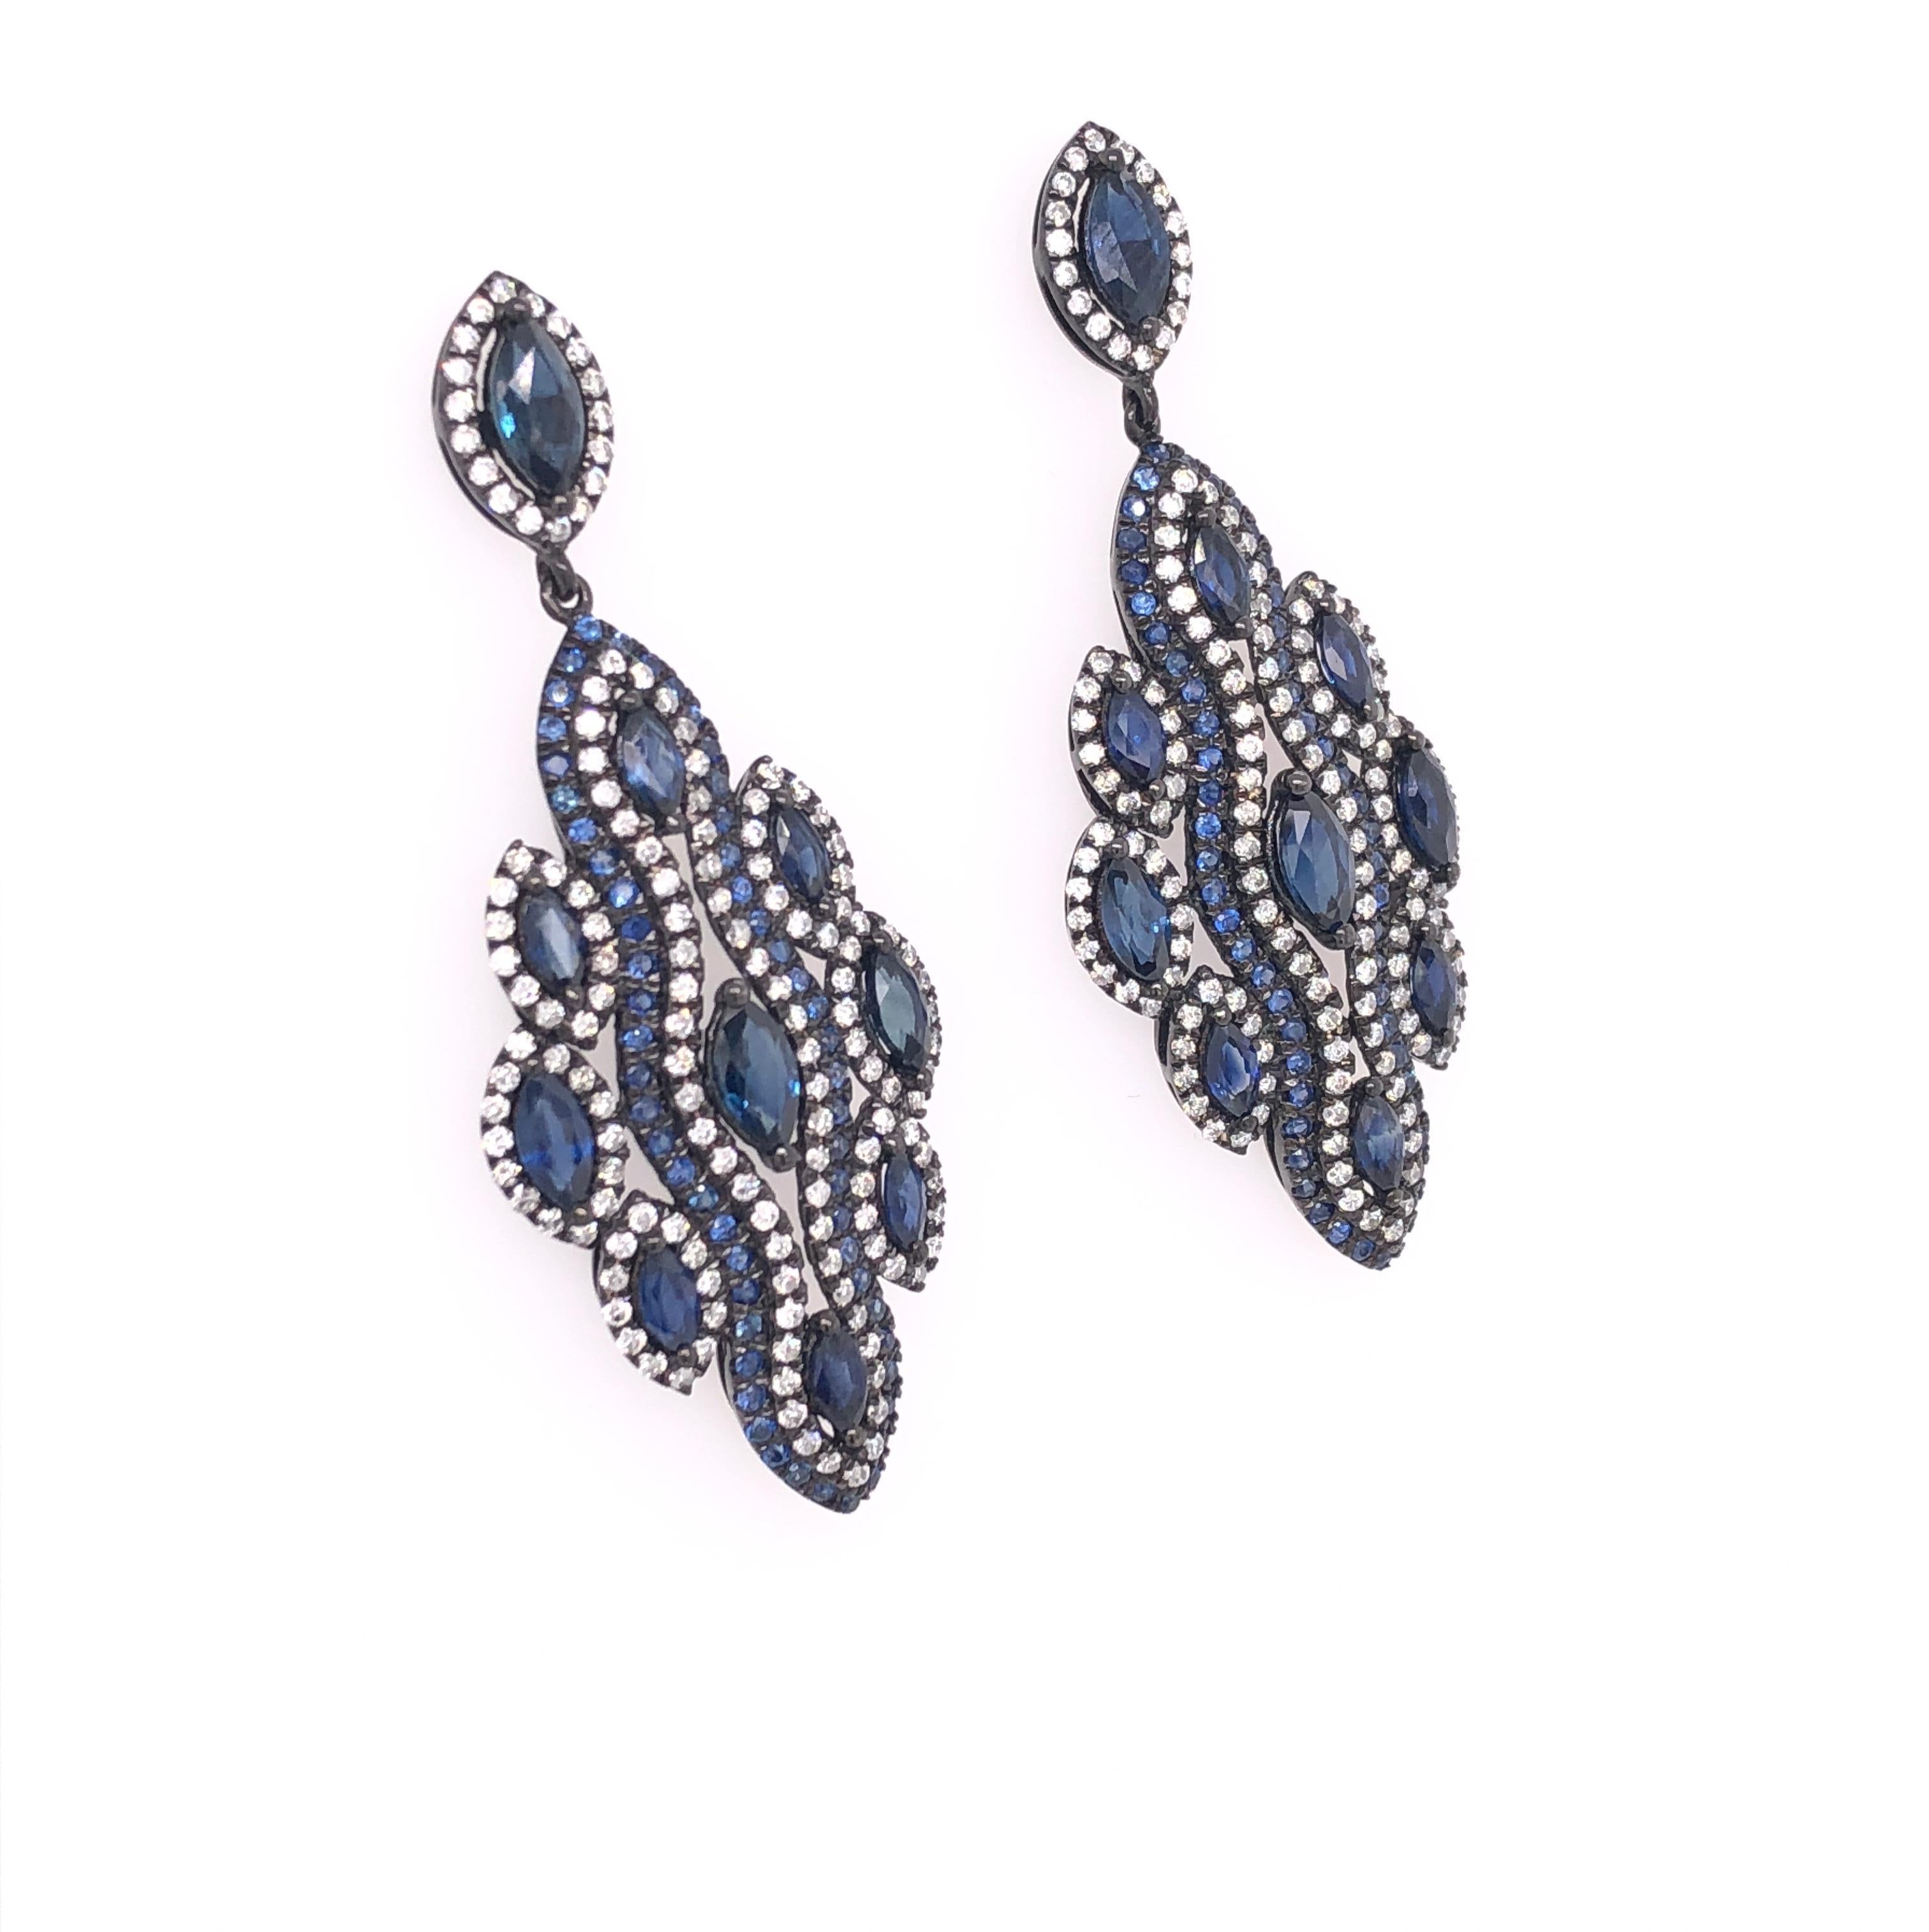 Midnight Blue Collection

Drop blue Sapphire and Diamond earrings set in 18K black rhodium gold. 

Blue Sapphires: 7.38ct total weight.
Diamonds: 1.19ct total weight.
All diamonds are G-H/SI stones.
Width - is approximately 2cm/0.79inches.
Height -